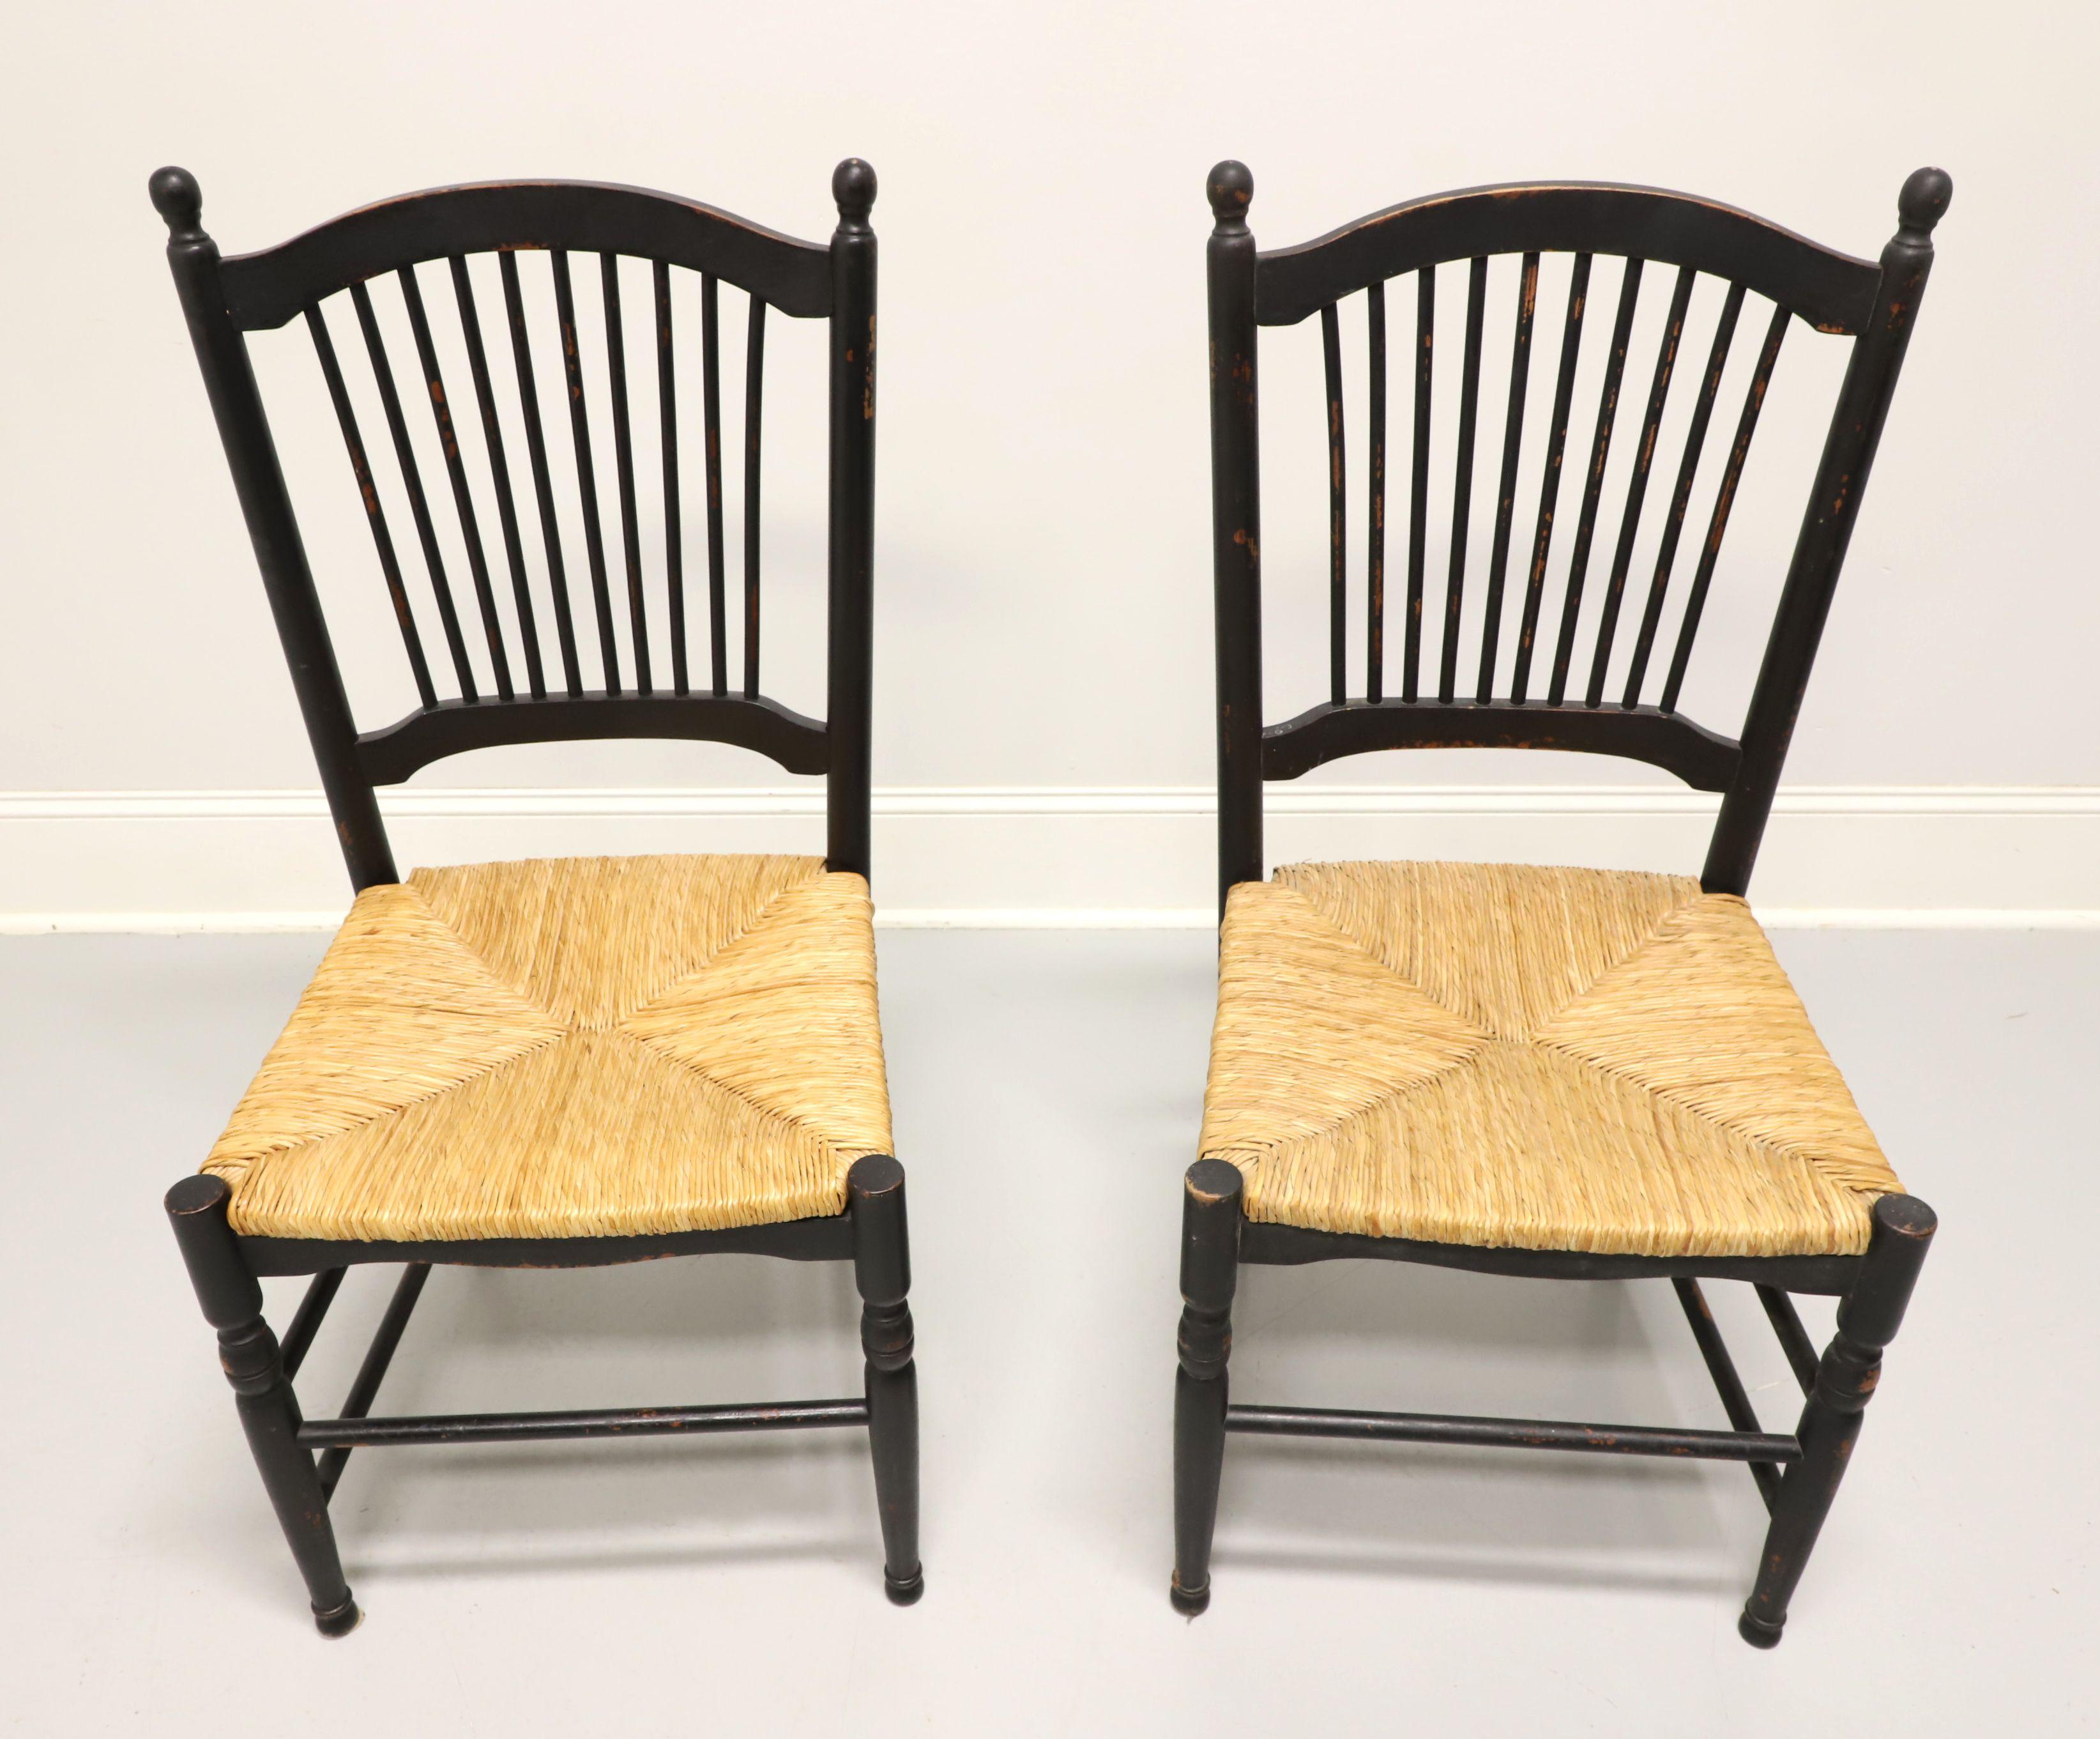 A pair of dining side chairs in the Cottage / Rustic style, unbranded. Solid hardwood painted black, distressed with touches of red, arched crest rail with spindle backs, rounded stiles capped with finial posts, rush seats, carved apron, turned